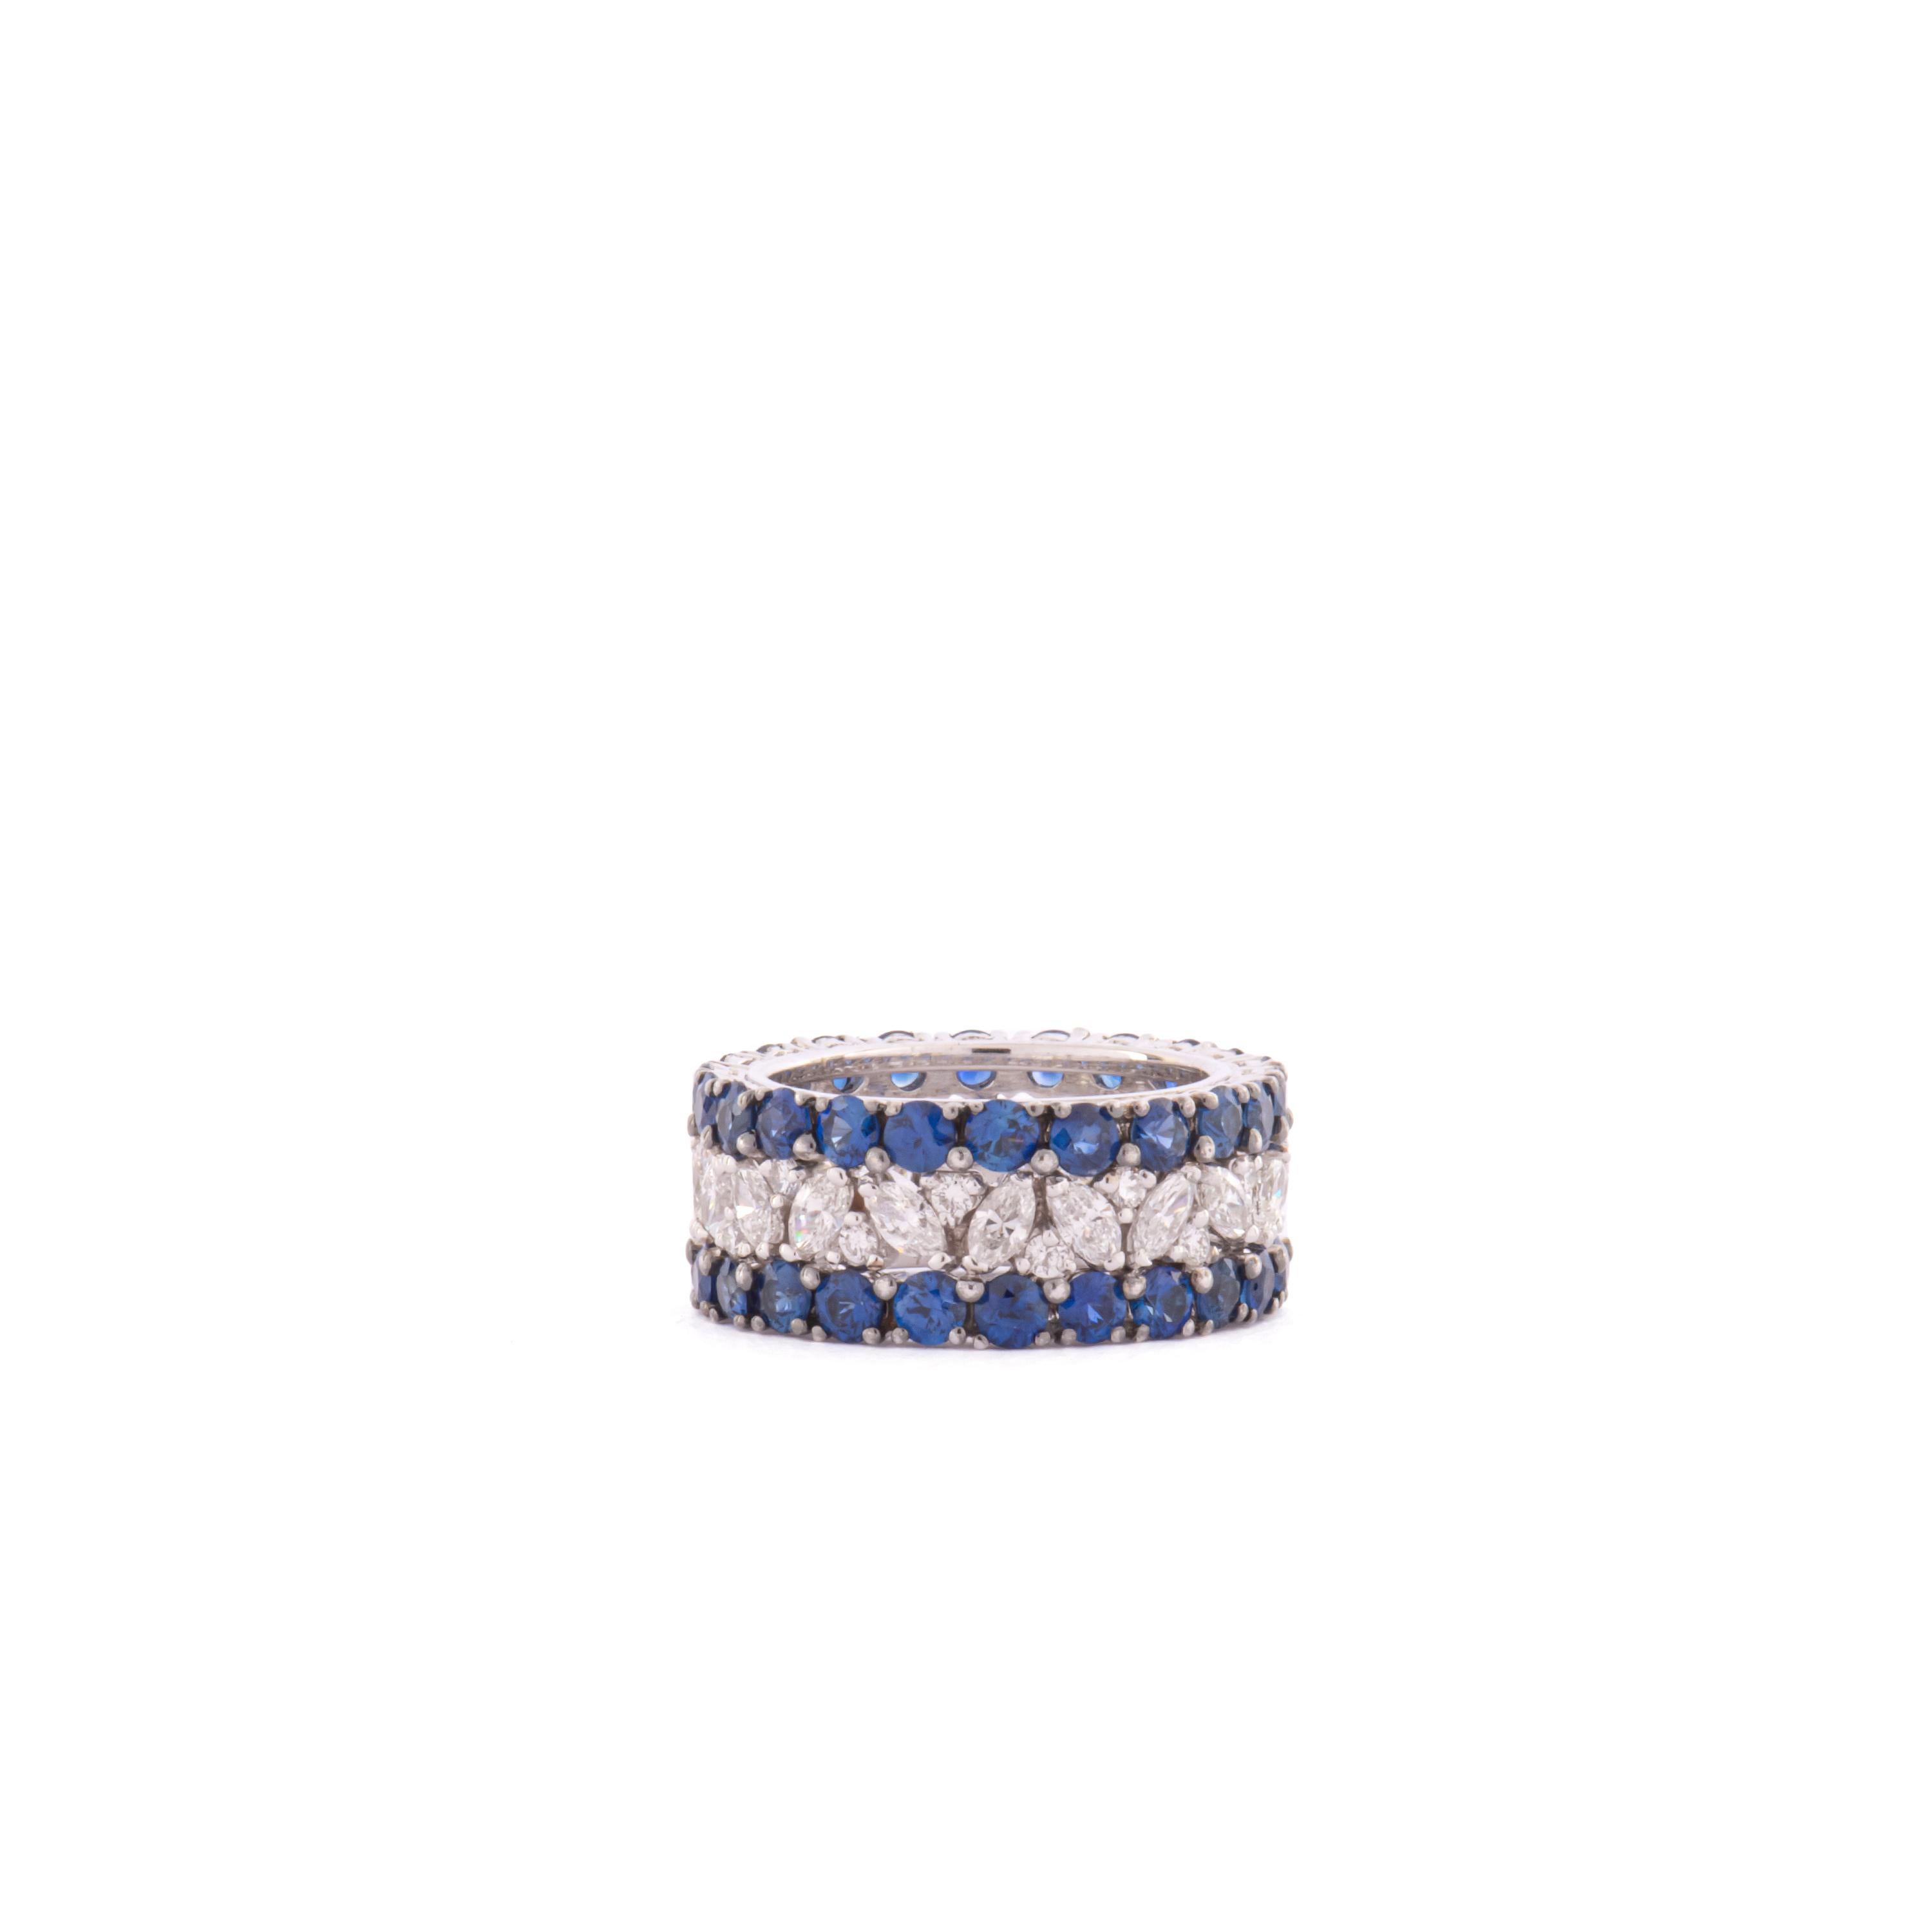 Lovely 18 Kt white gold ring featuring diamonds, brilliant cut  ct. 0.36, brilliant shuttles ct. 1.60 and blue sapphires ct 4.23.

Size 12 Italian